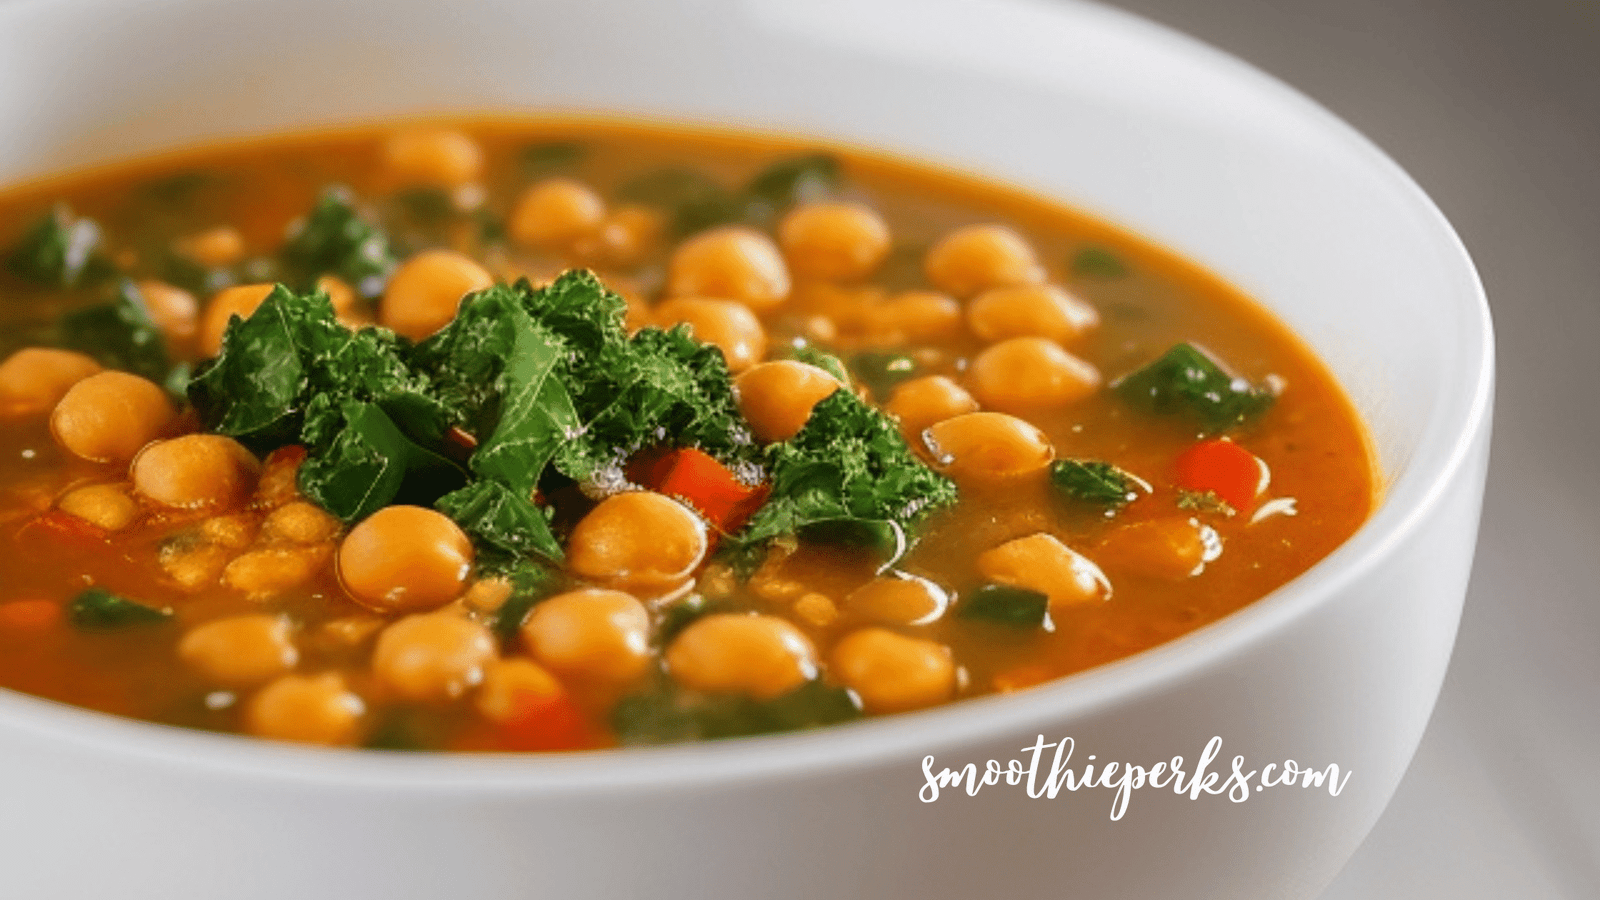 Thai-Inspired Easy To Make Spicy Chickpea and Kale Soup - SmoothiePerks